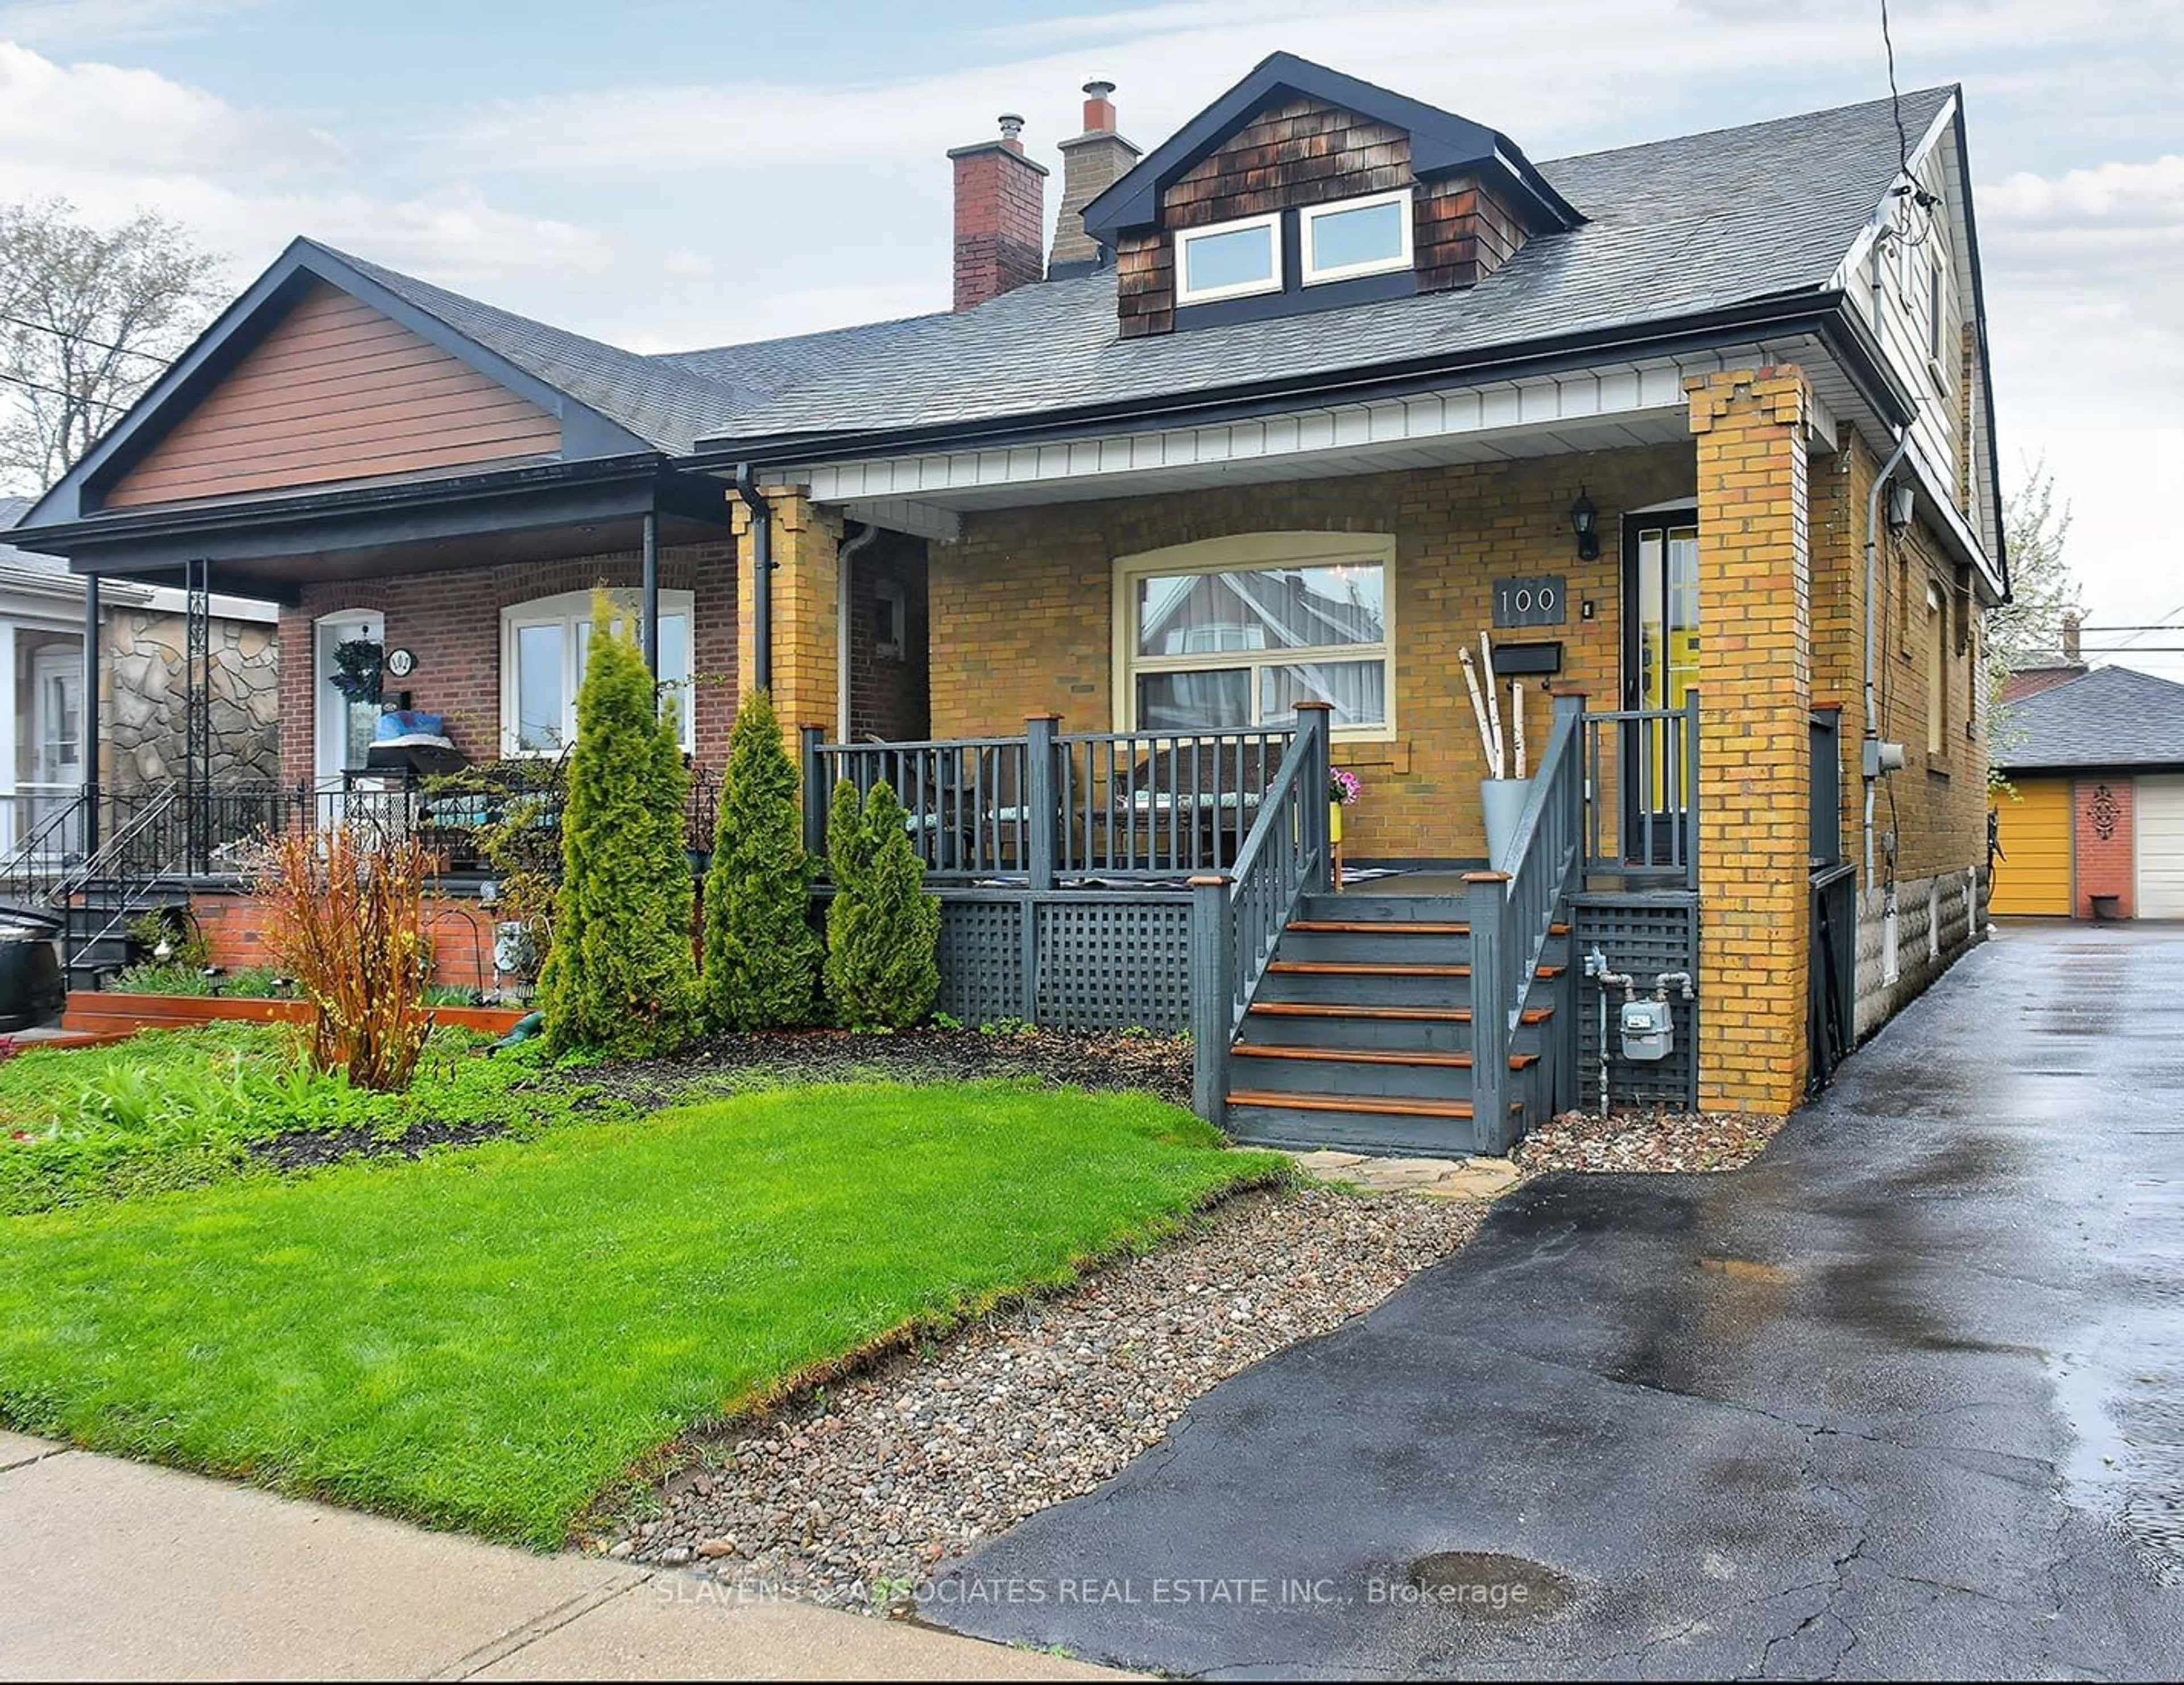 Frontside or backside of a home for 100 Belgravia Ave, Toronto Ontario M6E 2M5